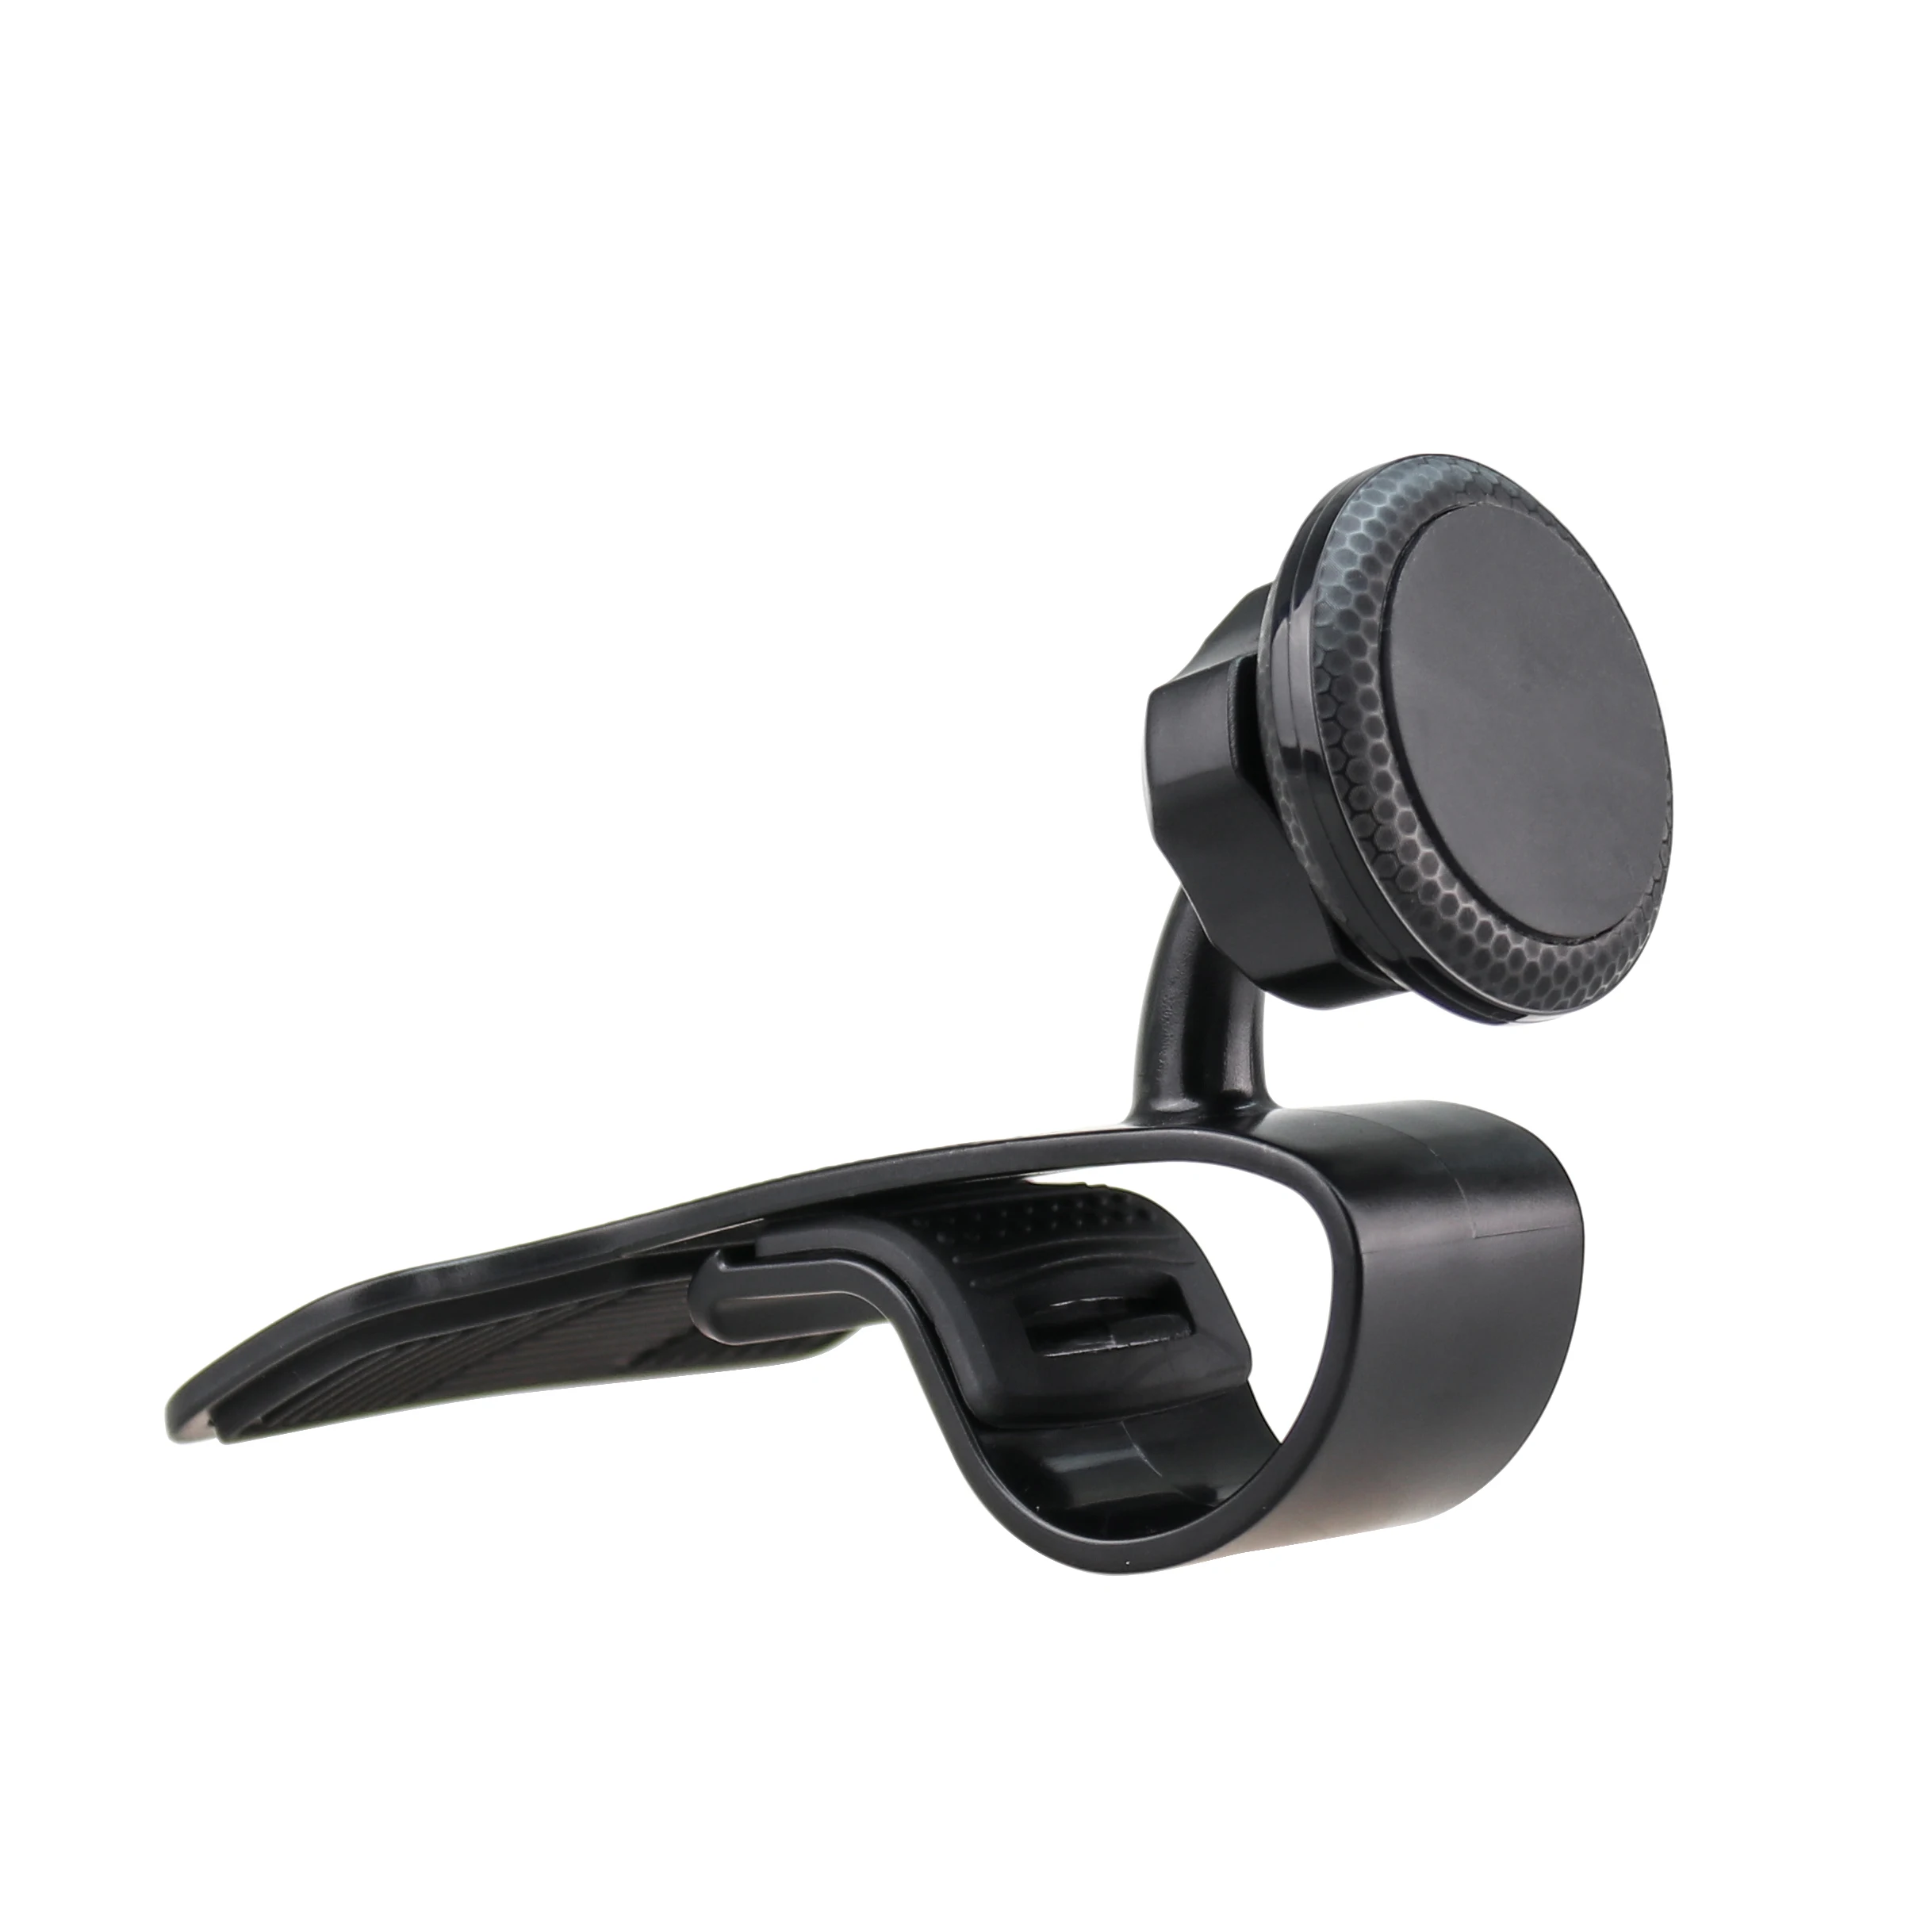 magnetic cell phone mount